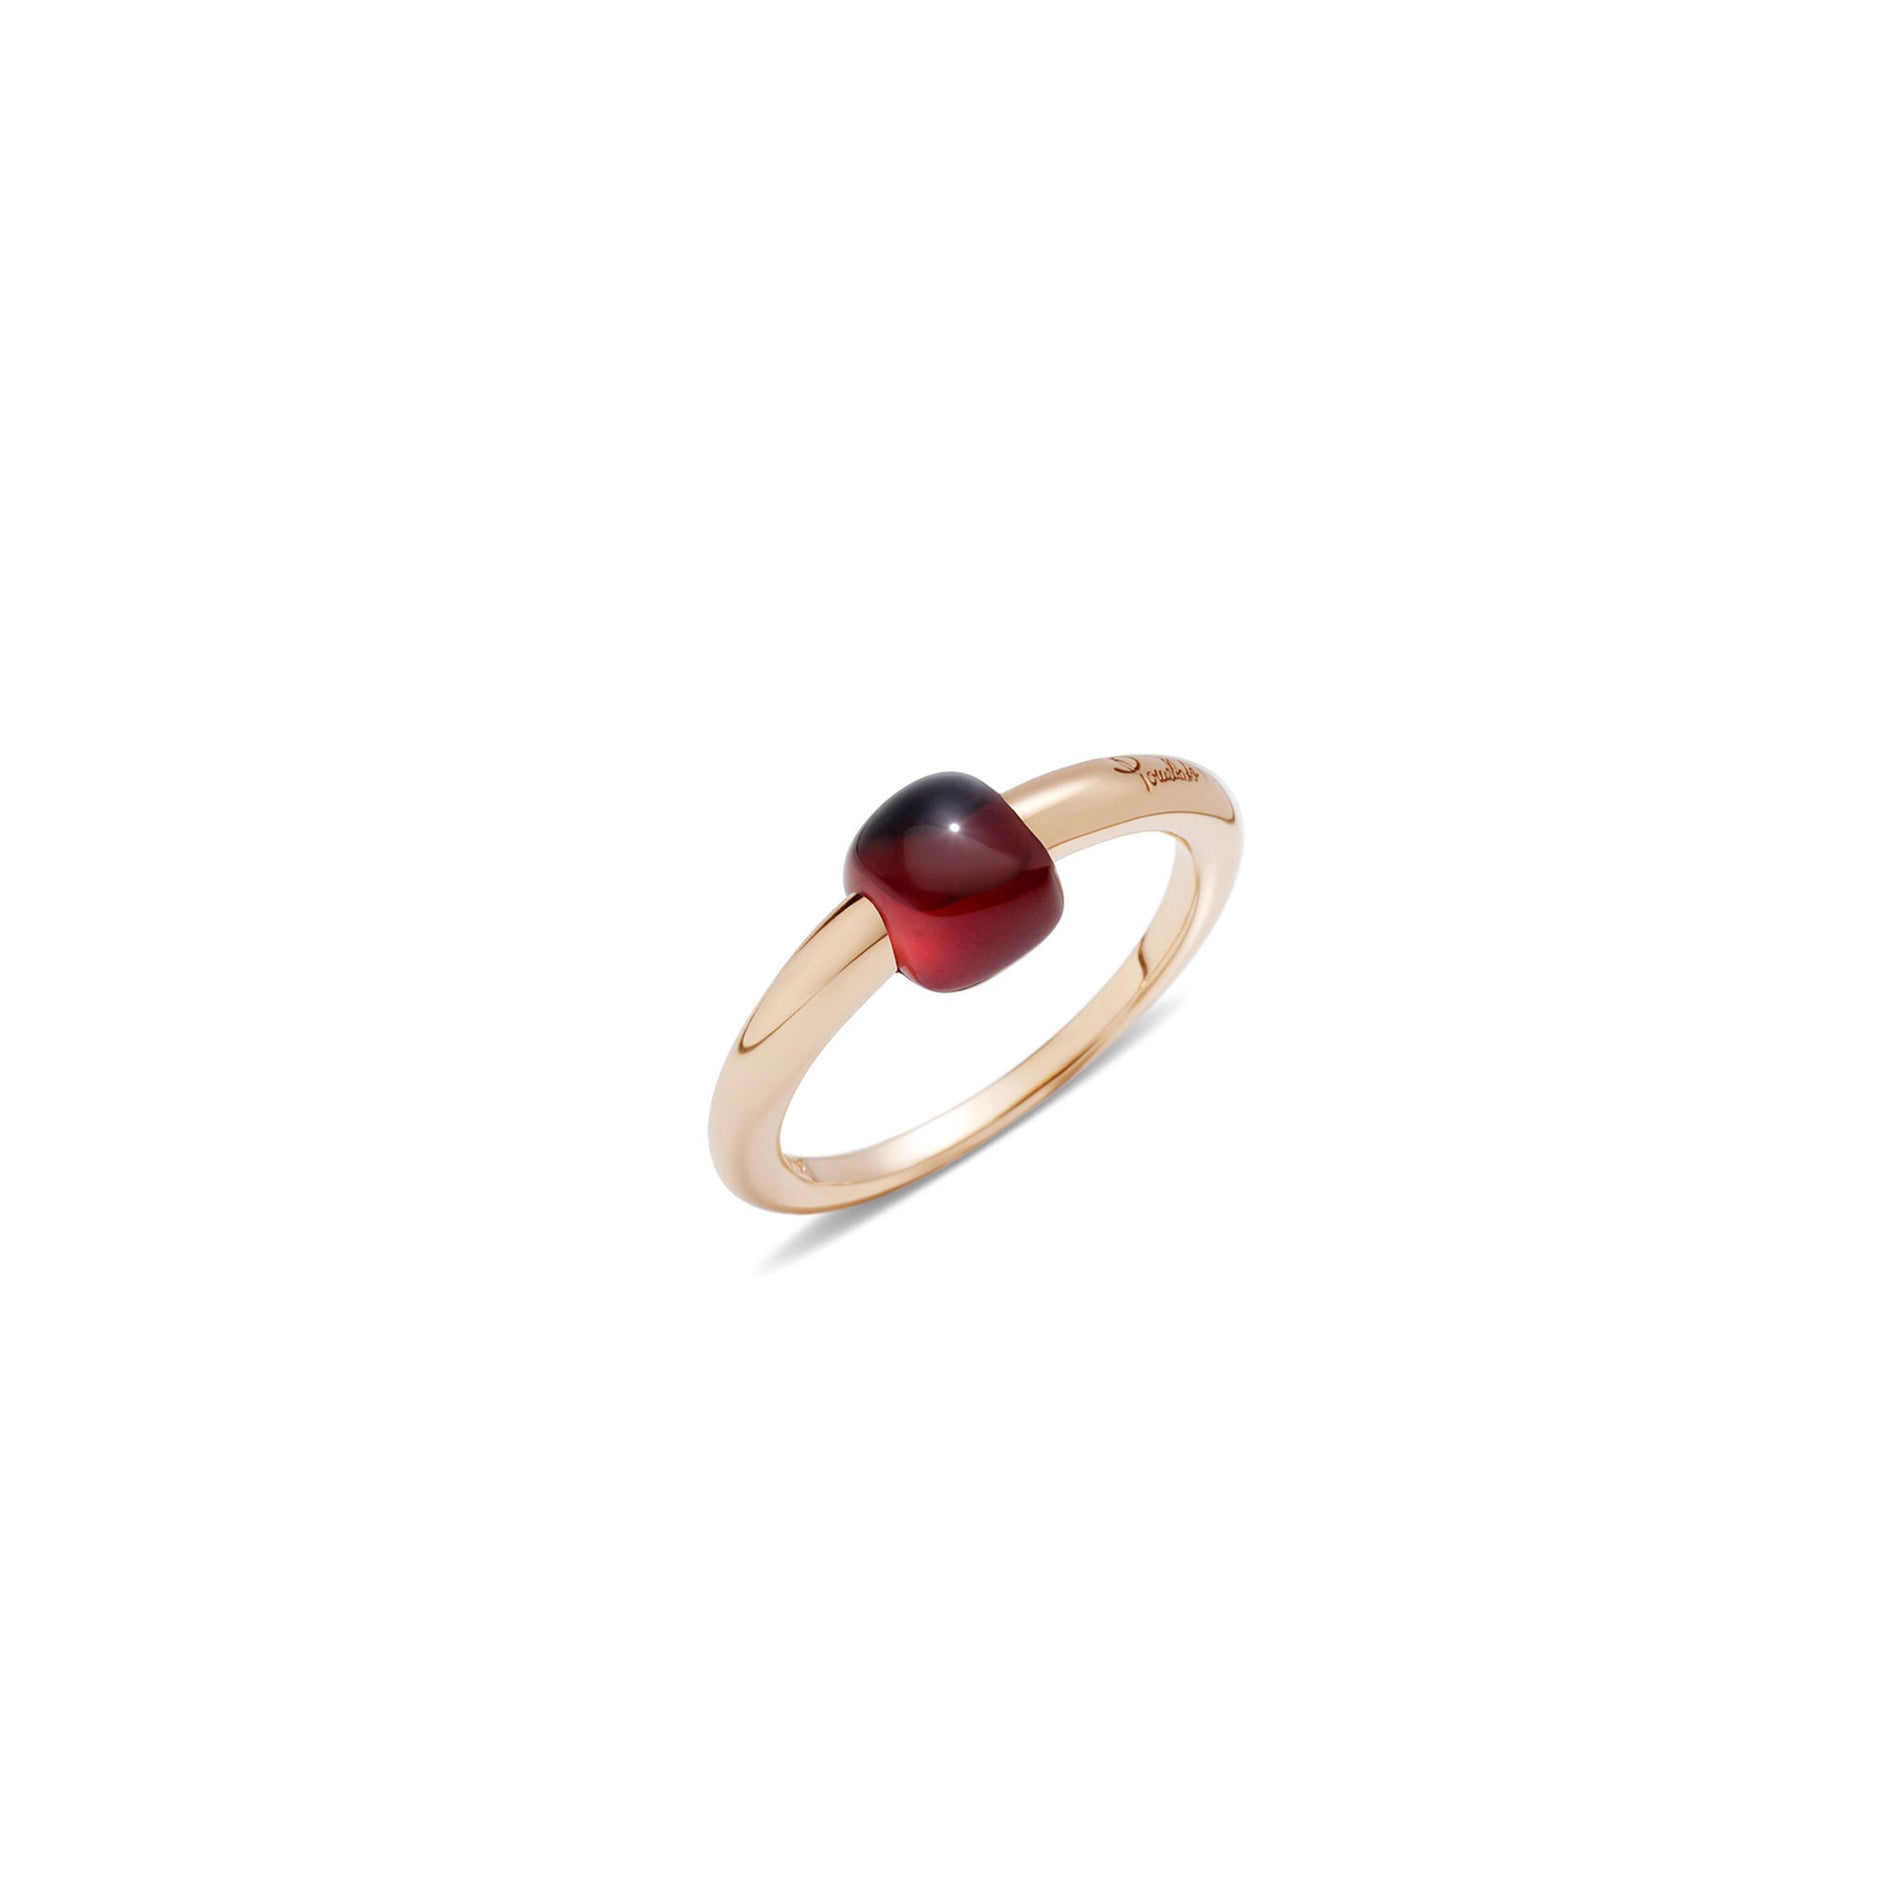 M'ama non M'ama Ring in 18k Rose Gold with Garnet - Orsini Jewellers NZ